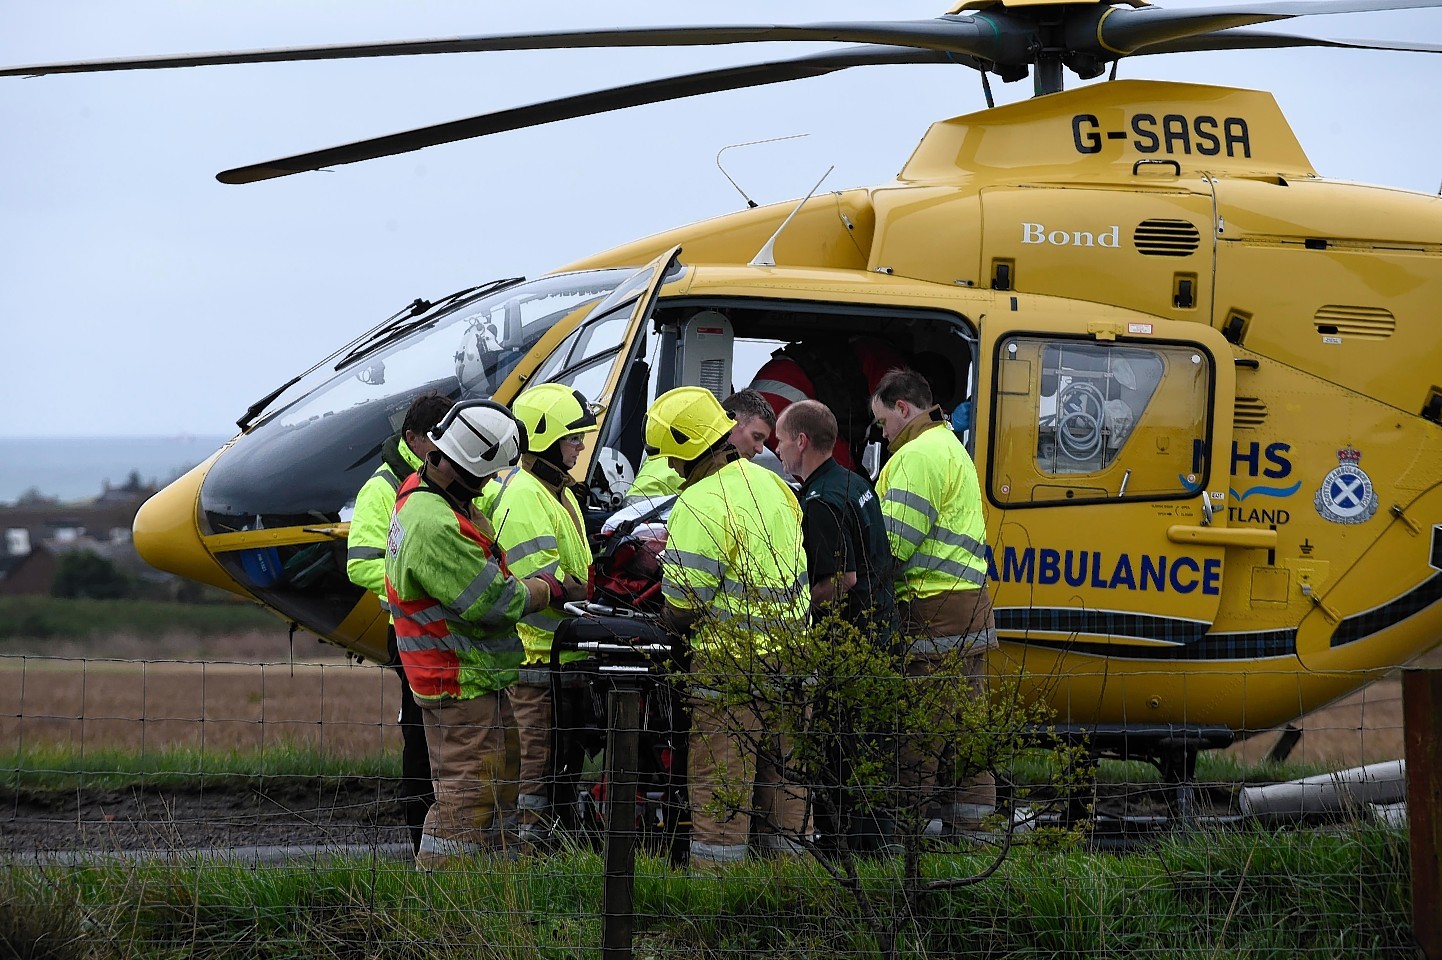 A man had to be airlifted to hospital but is not believed to be seriously injured